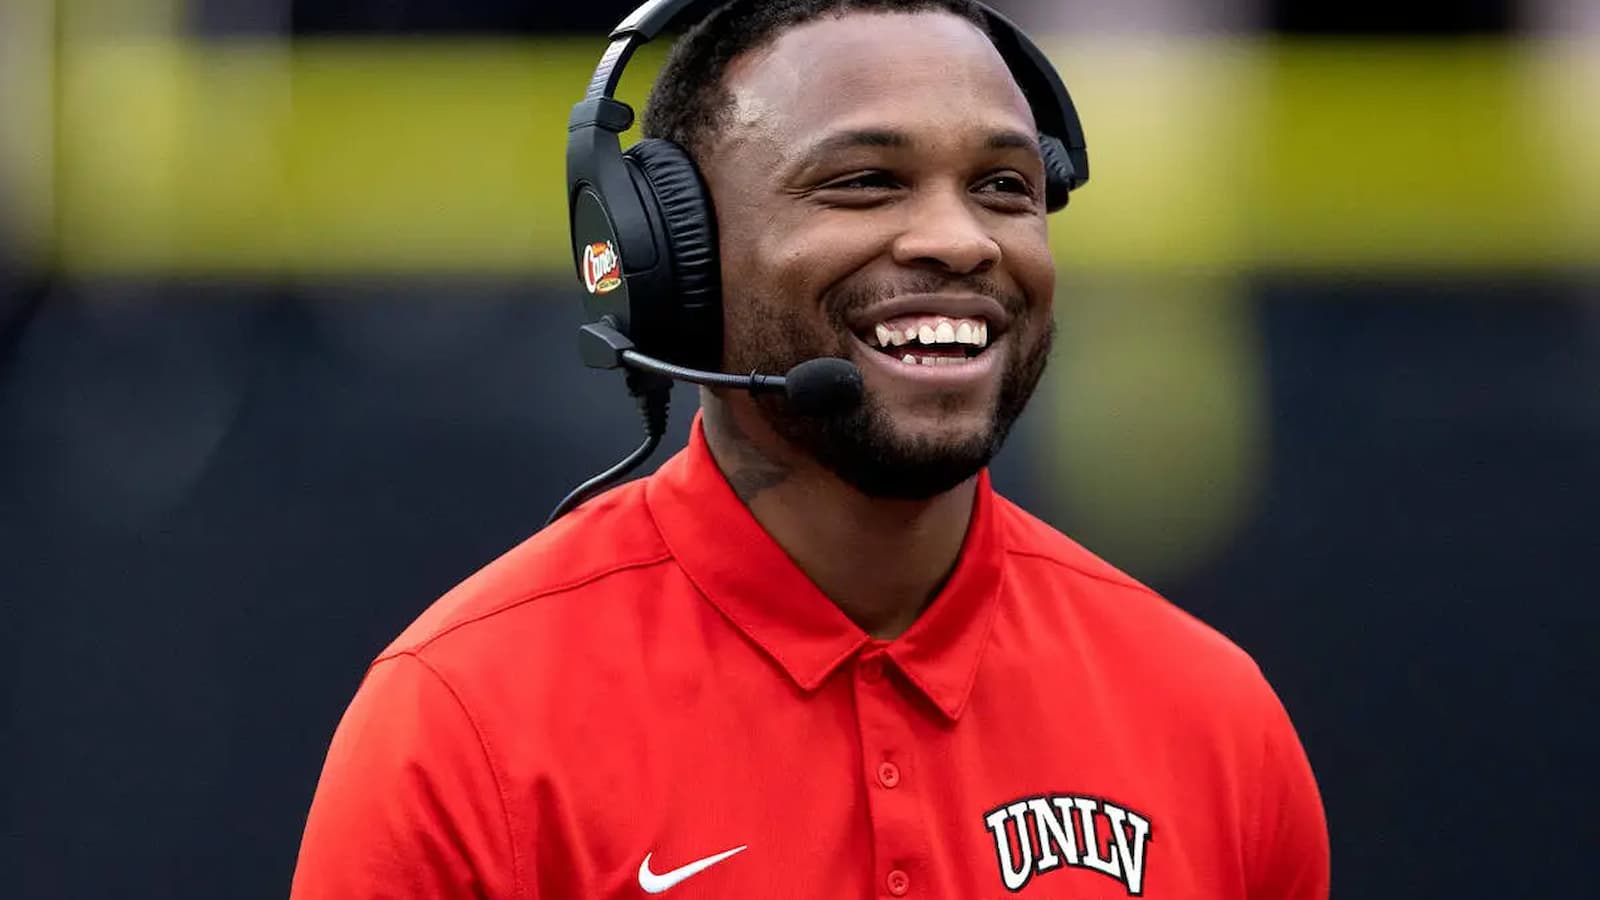 Florida Football: What is Brennan Marion's role as UNLV's offensive coordinator?